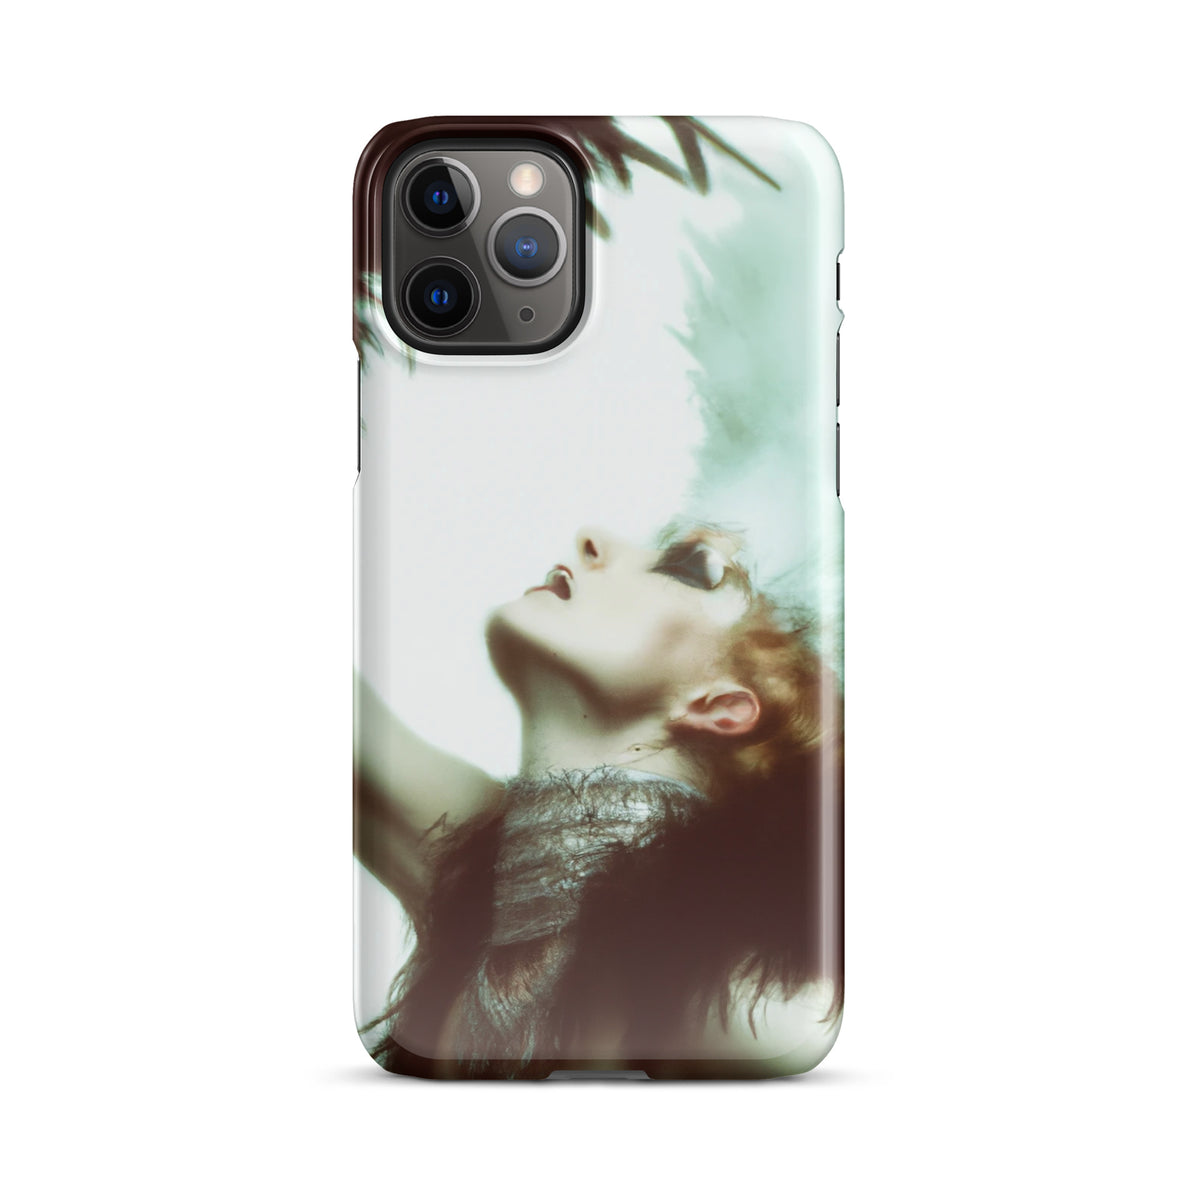 iPhone case with a Follies Bergere dancer with lots of plumage